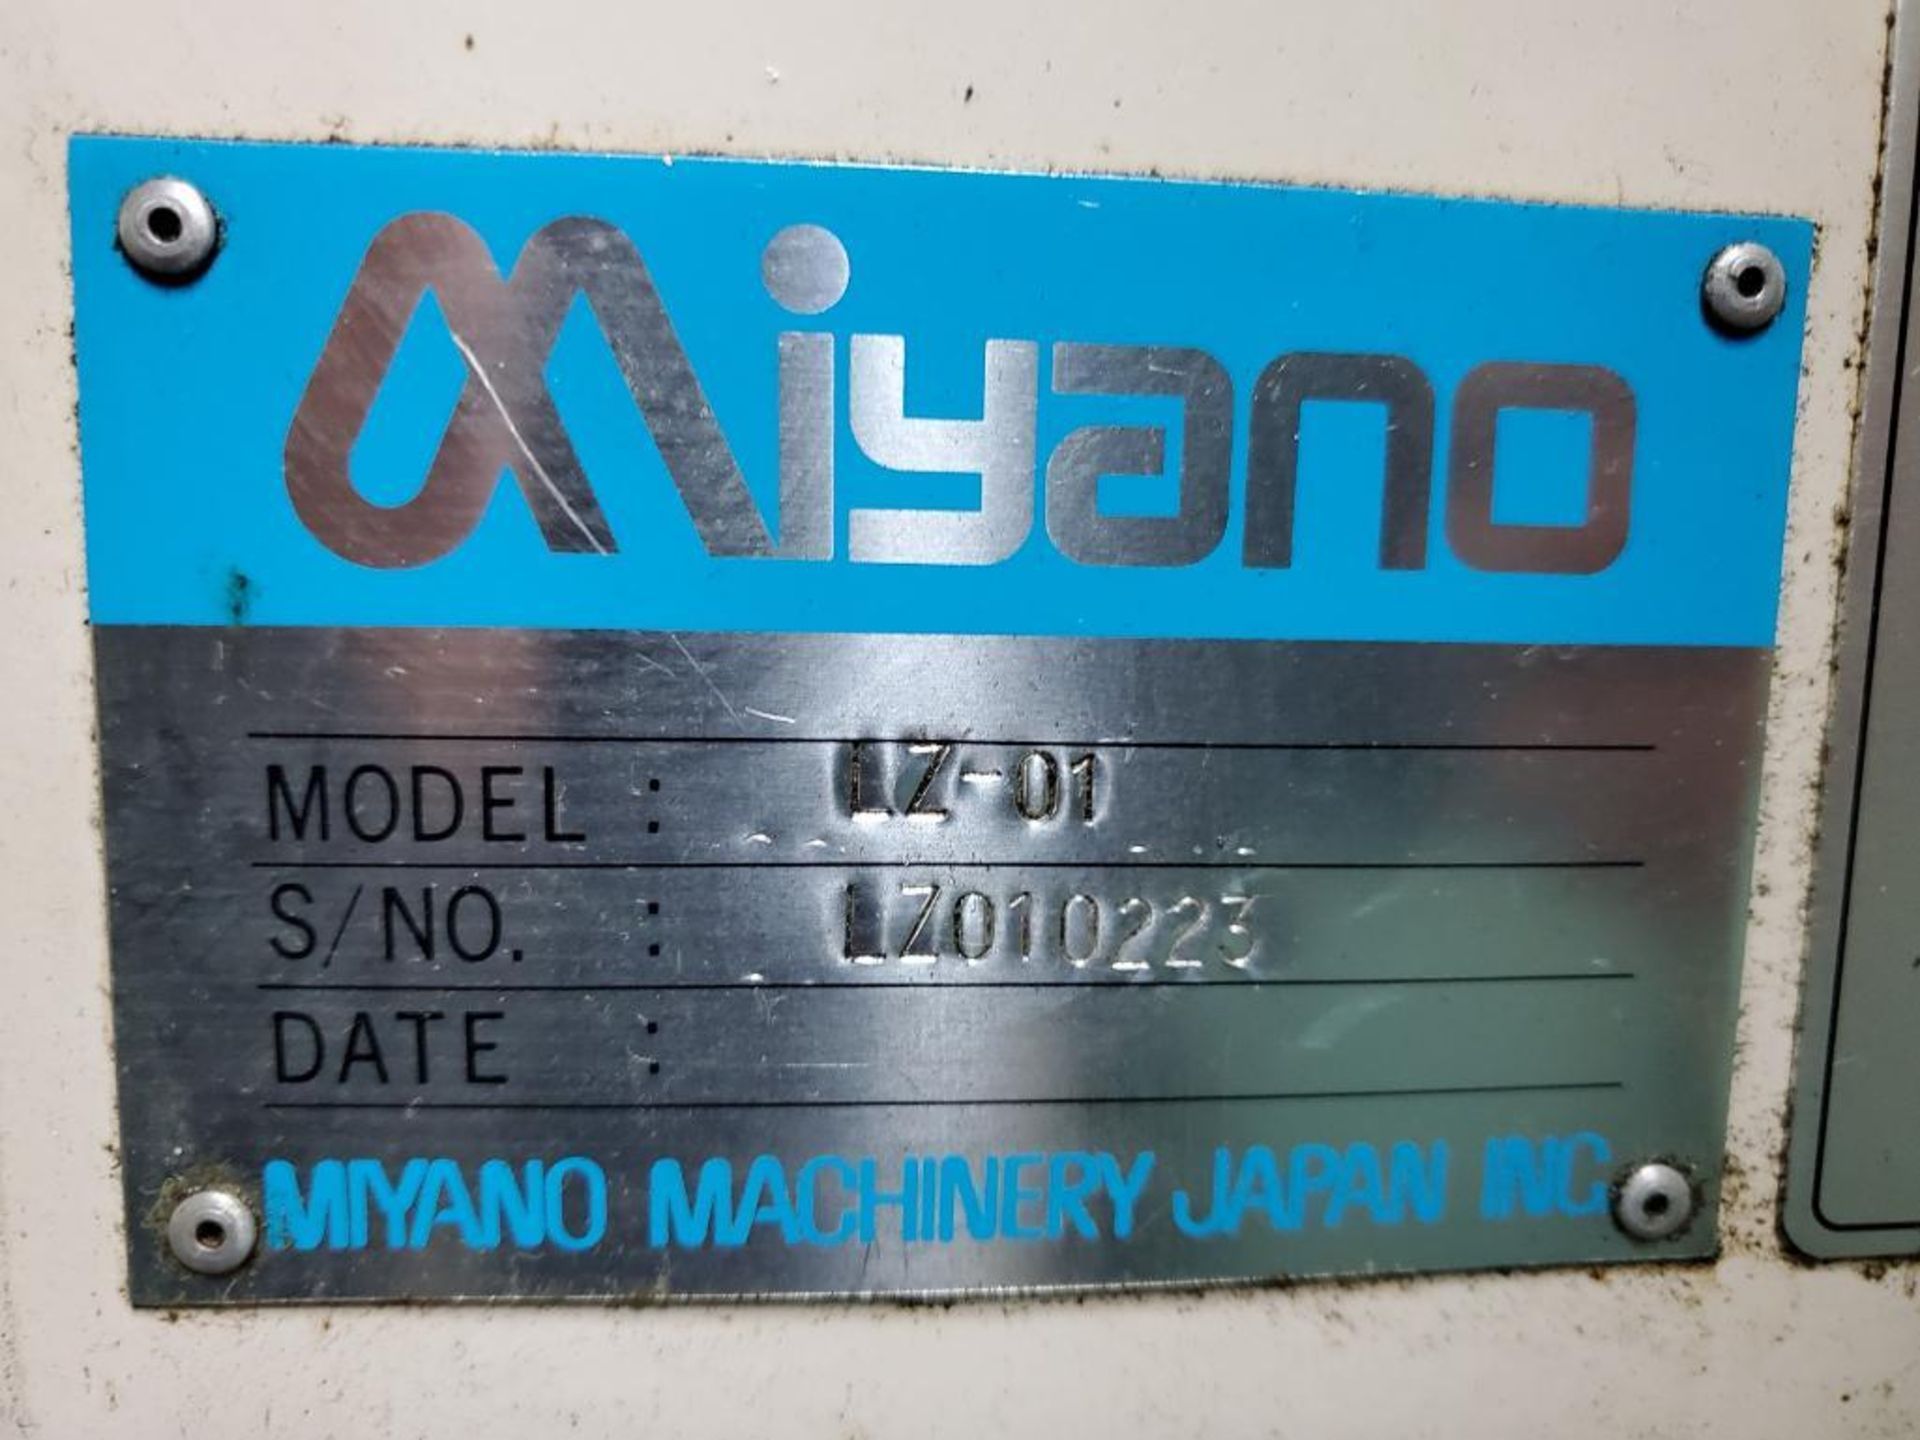 Miyano Model LZ-01 2-Axis Turning Center w/Auto Load/Unload System, S/N LZ010223, New 2001 - Image 10 of 13